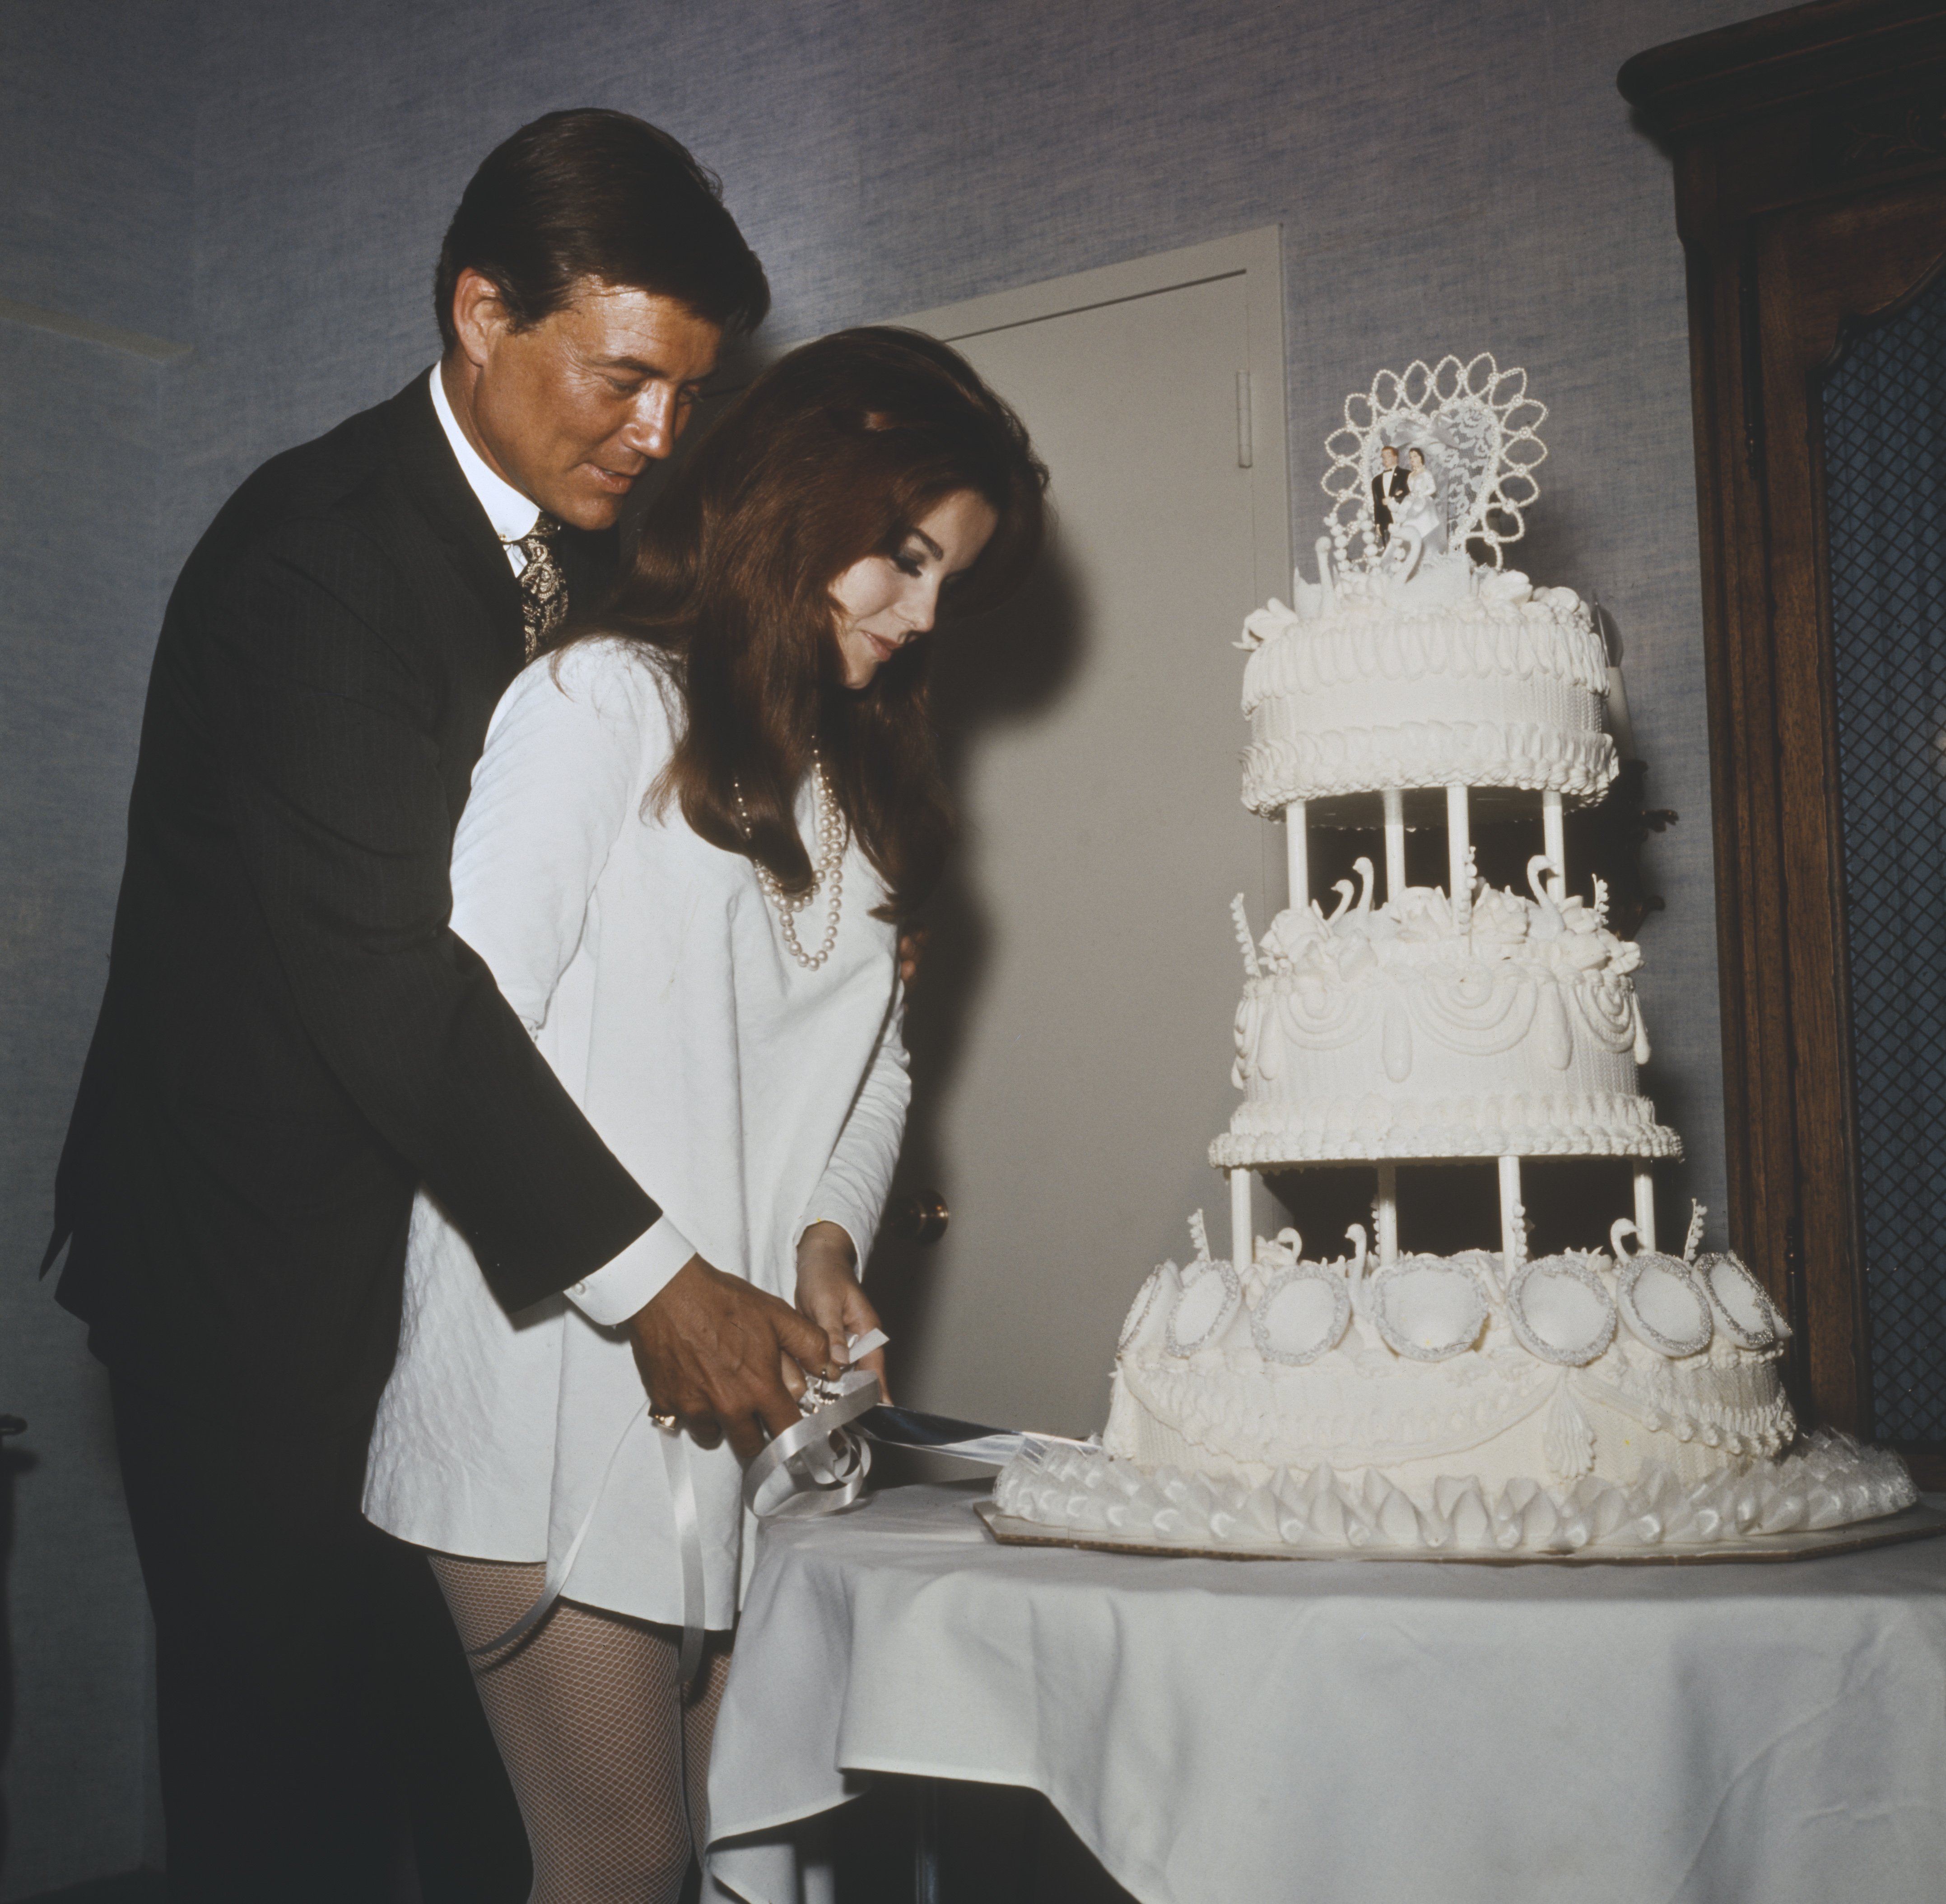 Newlyweds Roger Smith and Ann-Margret cut their wedding cake after their nuptials at the Riviera Hotel on May 8, 1967 in Las Vegas. / Source: Getty Images